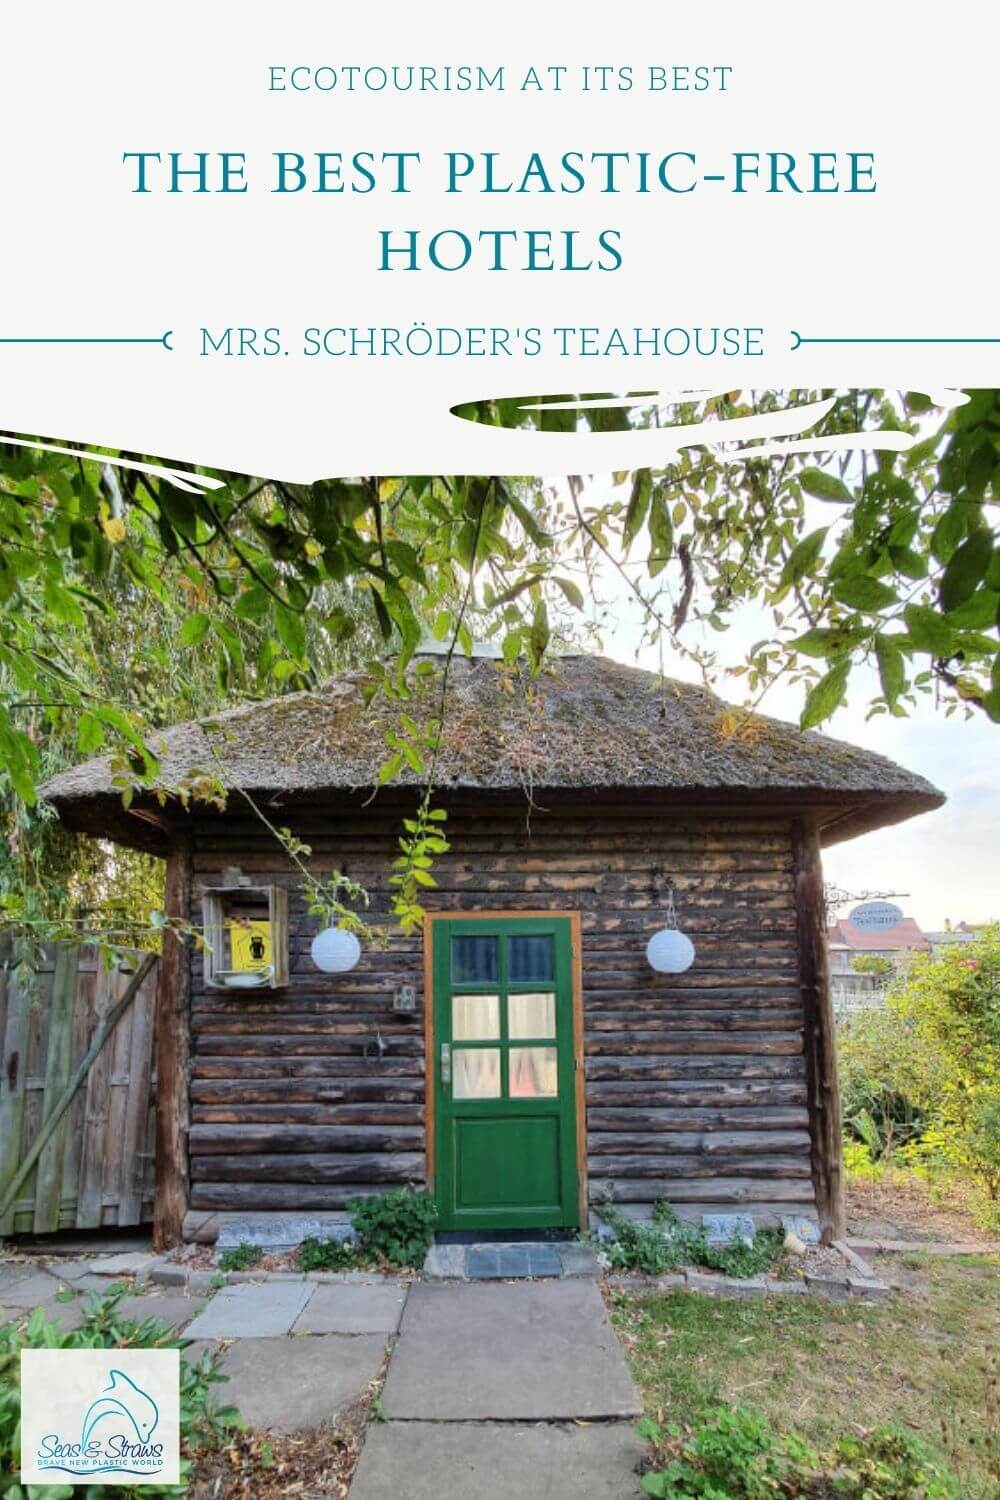 Mrs. Schröder's teahouse is a beautiful, plastic-free tiny house surrounded by extensive gardens. Perfect for the nature-loving guest.